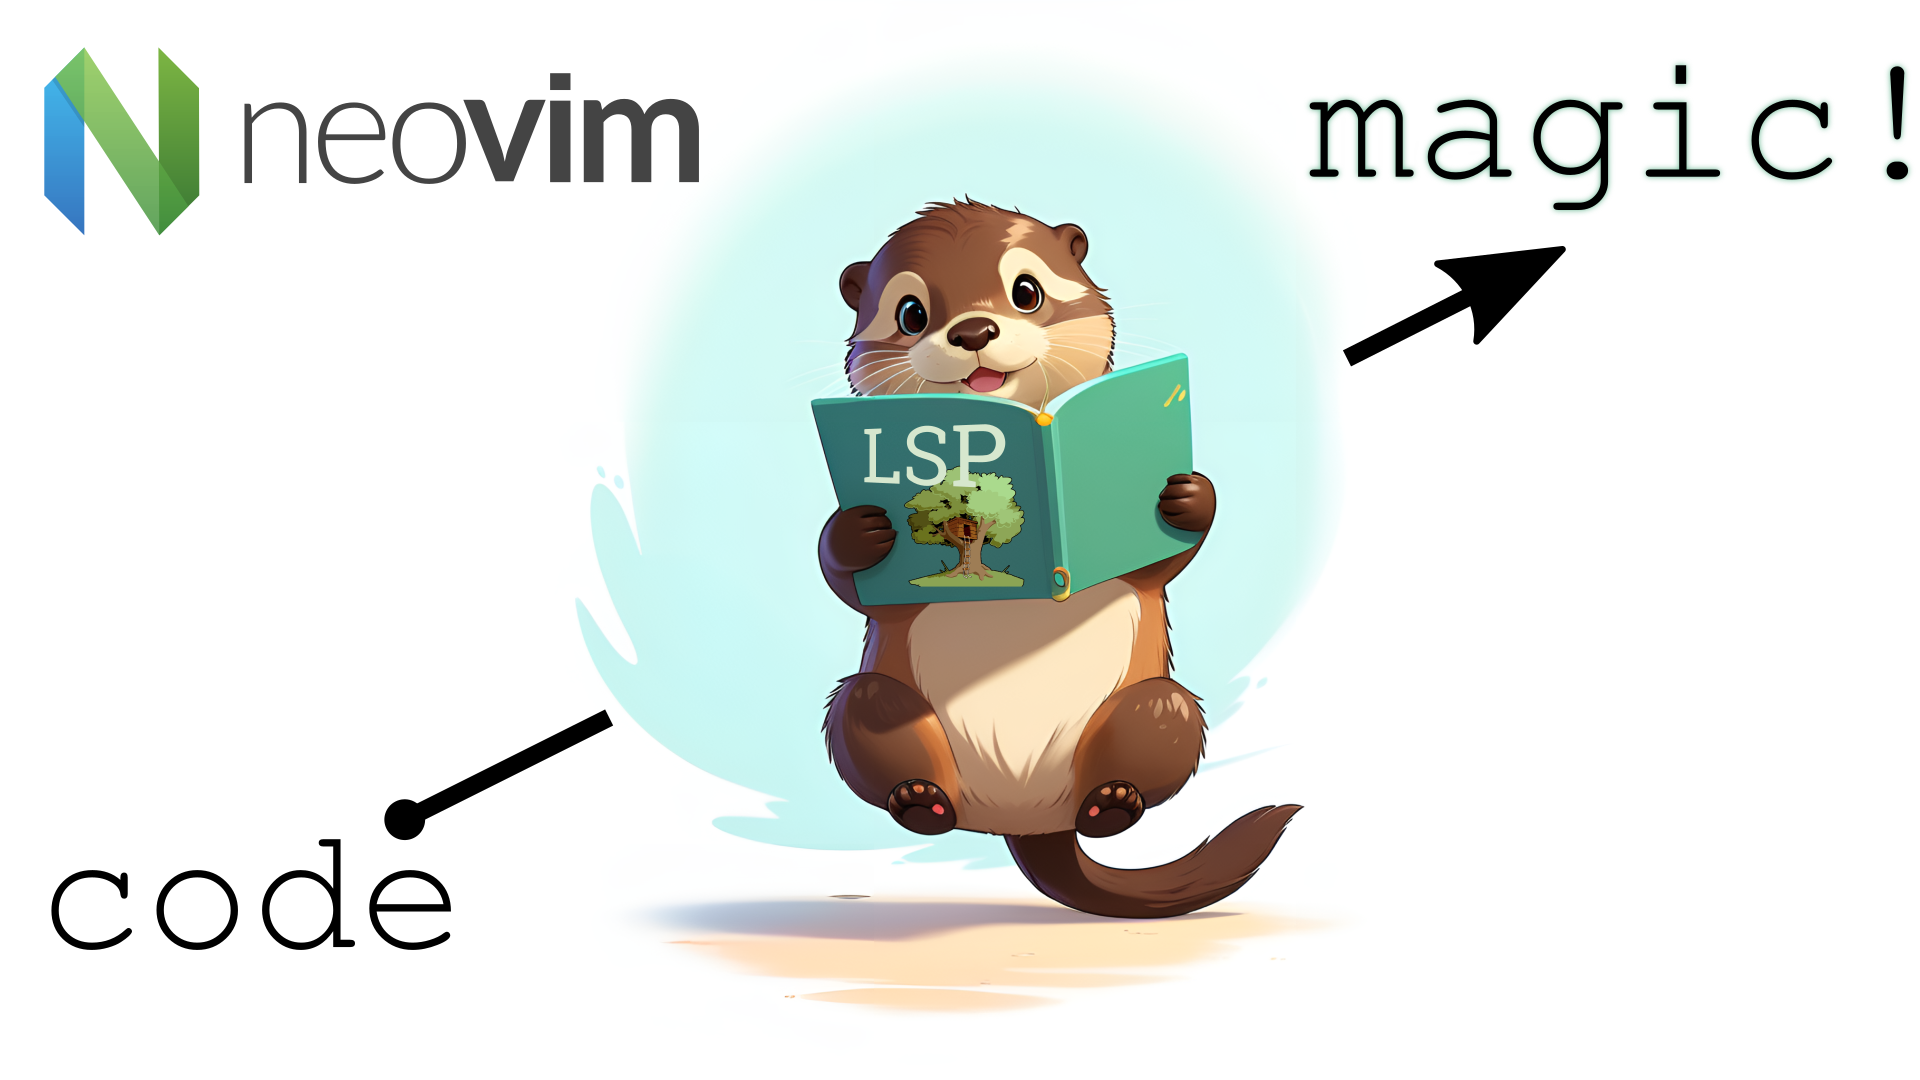 An otter eagerly awaiting your lsp requests.